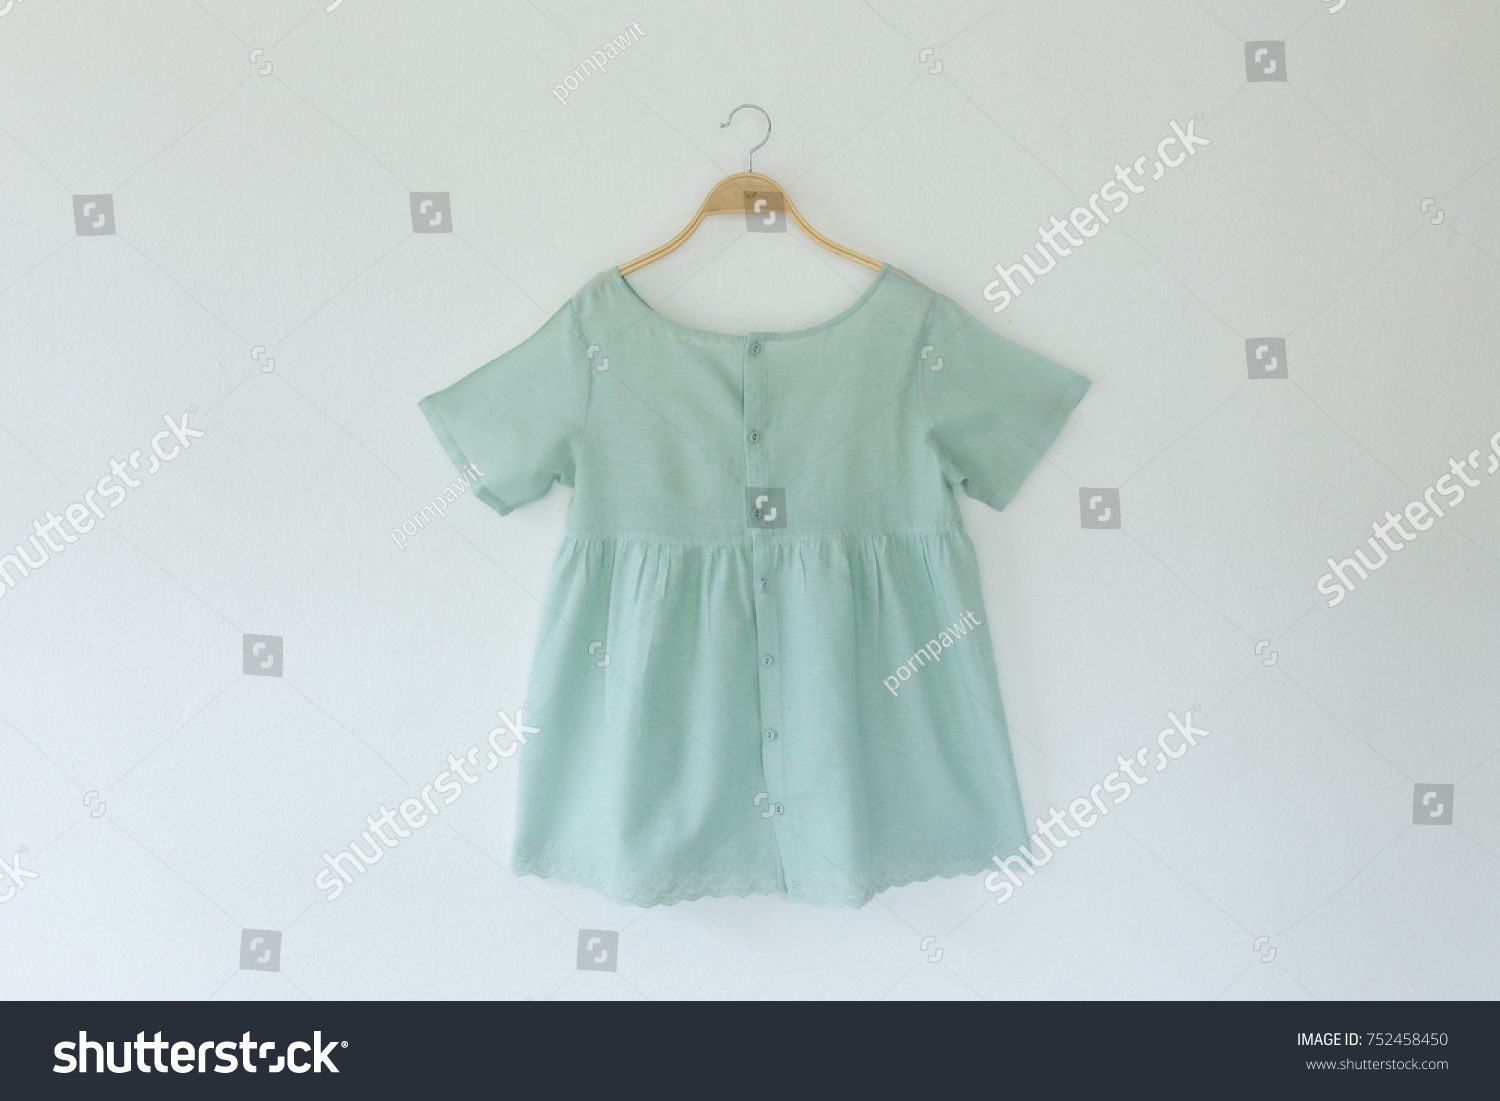 Green Clothes Isolated On White Background Stock Photo 752458450 ...